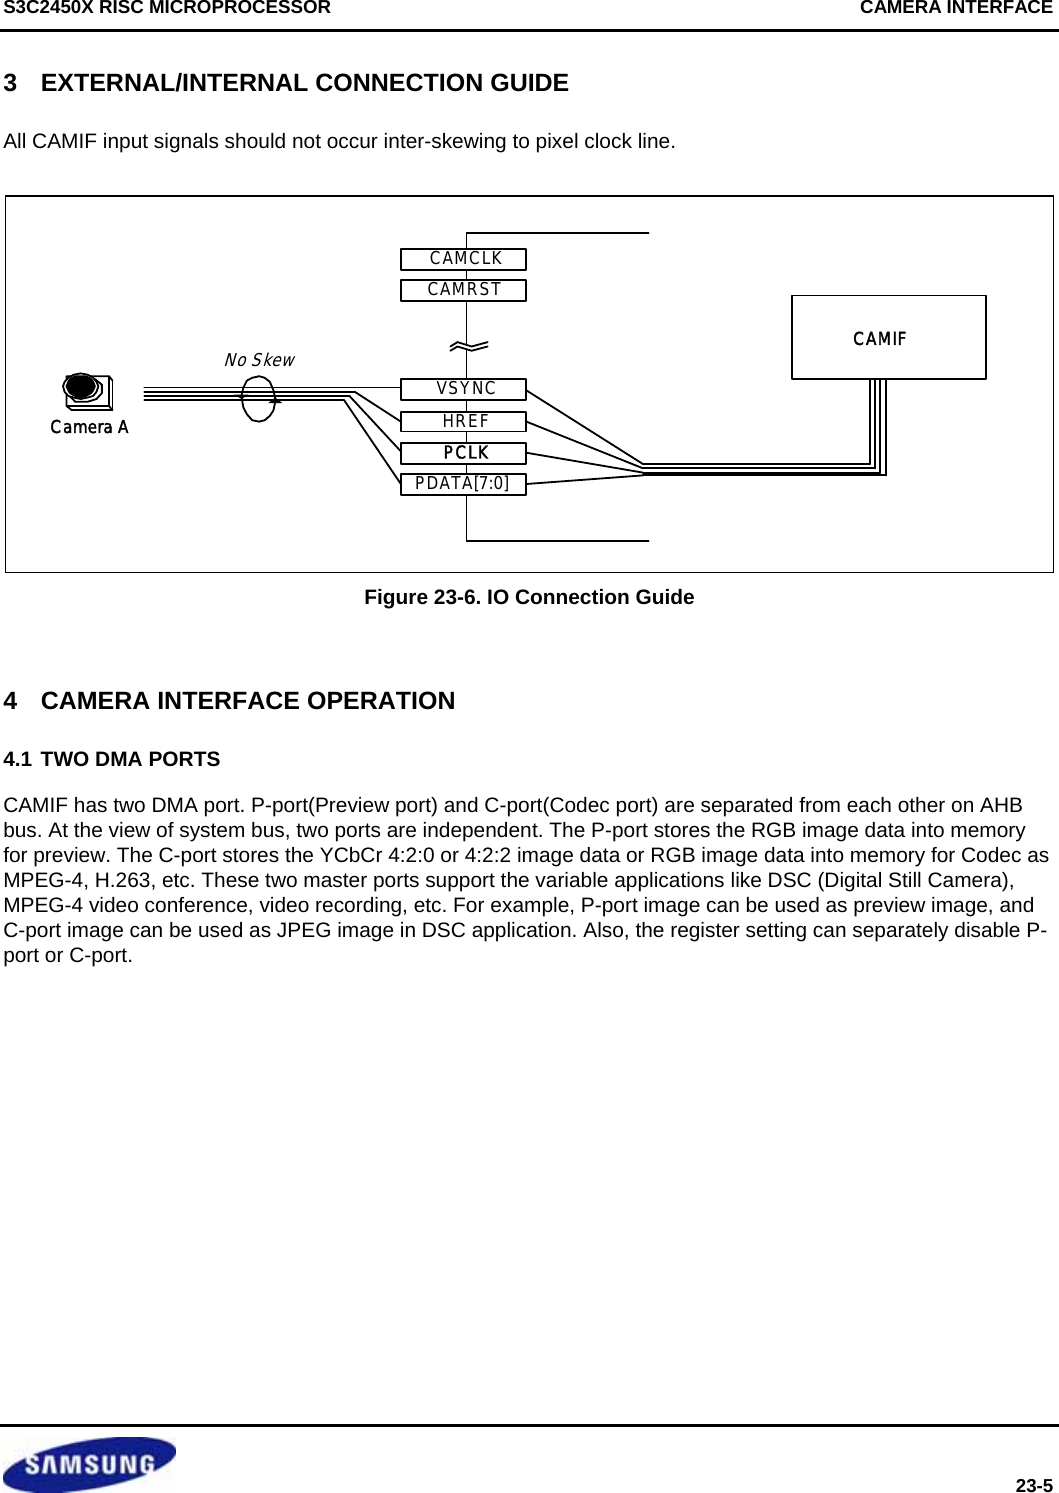 S3C2450X RISC MICROPROCESSOR    CAMERA INTERFACE  23-5 3  EXTERNAL/INTERNAL CONNECTION GUIDE All CAMIF input signals should not occur inter-skewing to pixel clock line.  CAMRSTCAMCLKVSYNCHREFPCLKPDATA[7:0]CAMIFCamera ANo Skew Figure 23-6. IO Connection Guide  4  CAMERA INTERFACE OPERATION 4.1 TWO DMA PORTS CAMIF has two DMA port. P-port(Preview port) and C-port(Codec port) are separated from each other on AHB bus. At the view of system bus, two ports are independent. The P-port stores the RGB image data into memory for preview. The C-port stores the YCbCr 4:2:0 or 4:2:2 image data or RGB image data into memory for Codec as MPEG-4, H.263, etc. These two master ports support the variable applications like DSC (Digital Still Camera), MPEG-4 video conference, video recording, etc. For example, P-port image can be used as preview image, and C-port image can be used as JPEG image in DSC application. Also, the register setting can separately disable P-port or C-port.   